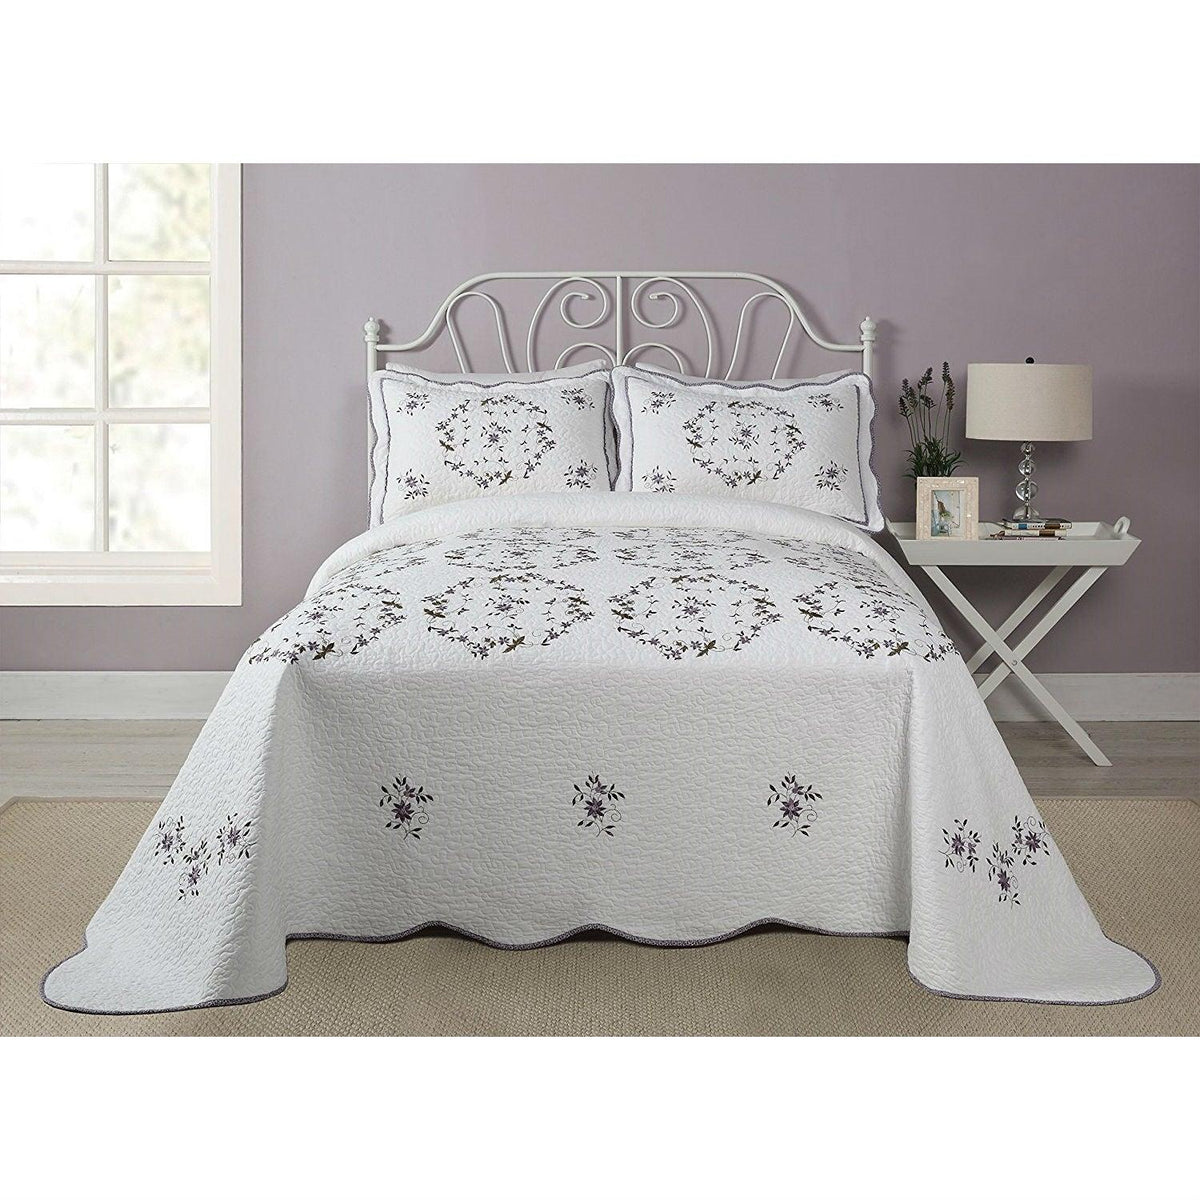 Queen size Cotton Bedspread with Scalloped Edges and Floral Print Embroidery in White - beddingbag.com